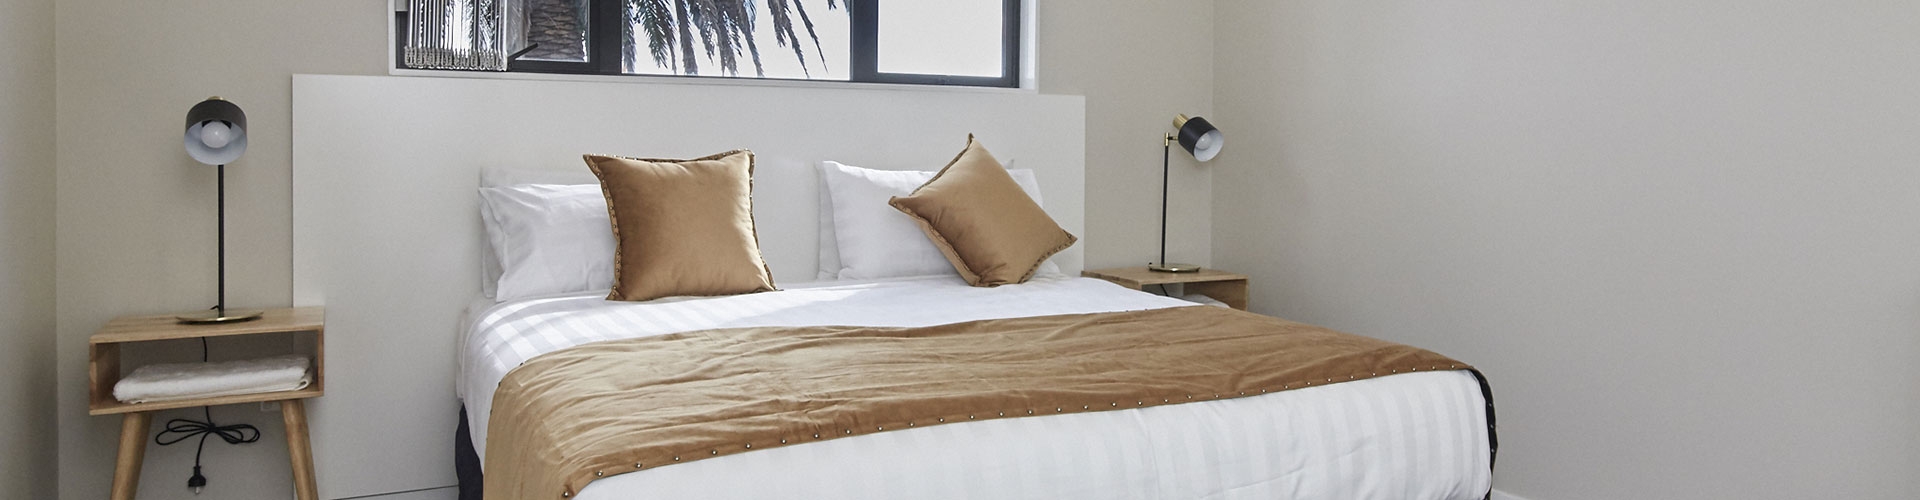 ensuite accommodation in central Auckland